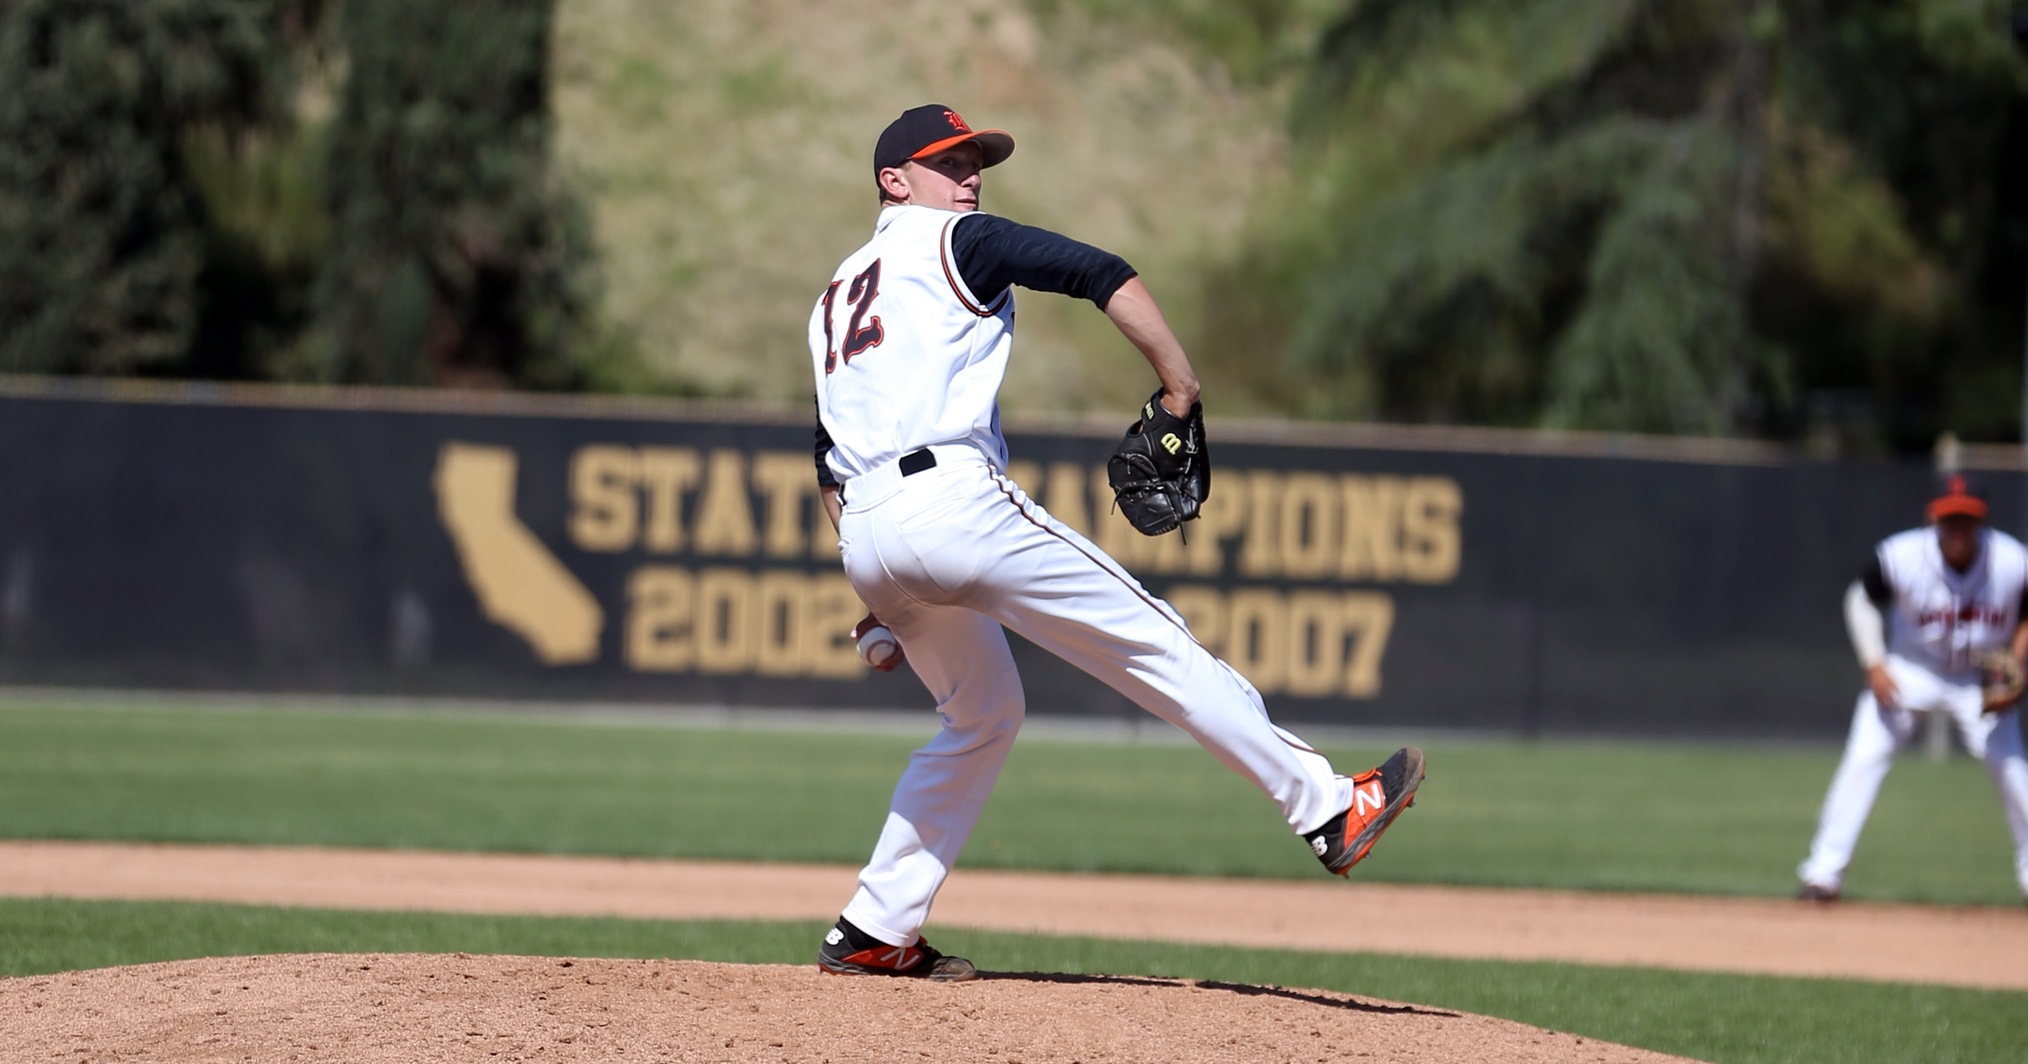 Garrett Irvin tossed a complete-game shutout in game one of the CCCAA Southern Regional playoffs against Cuesta on Friday. (Photo by Bobby R. Hester)